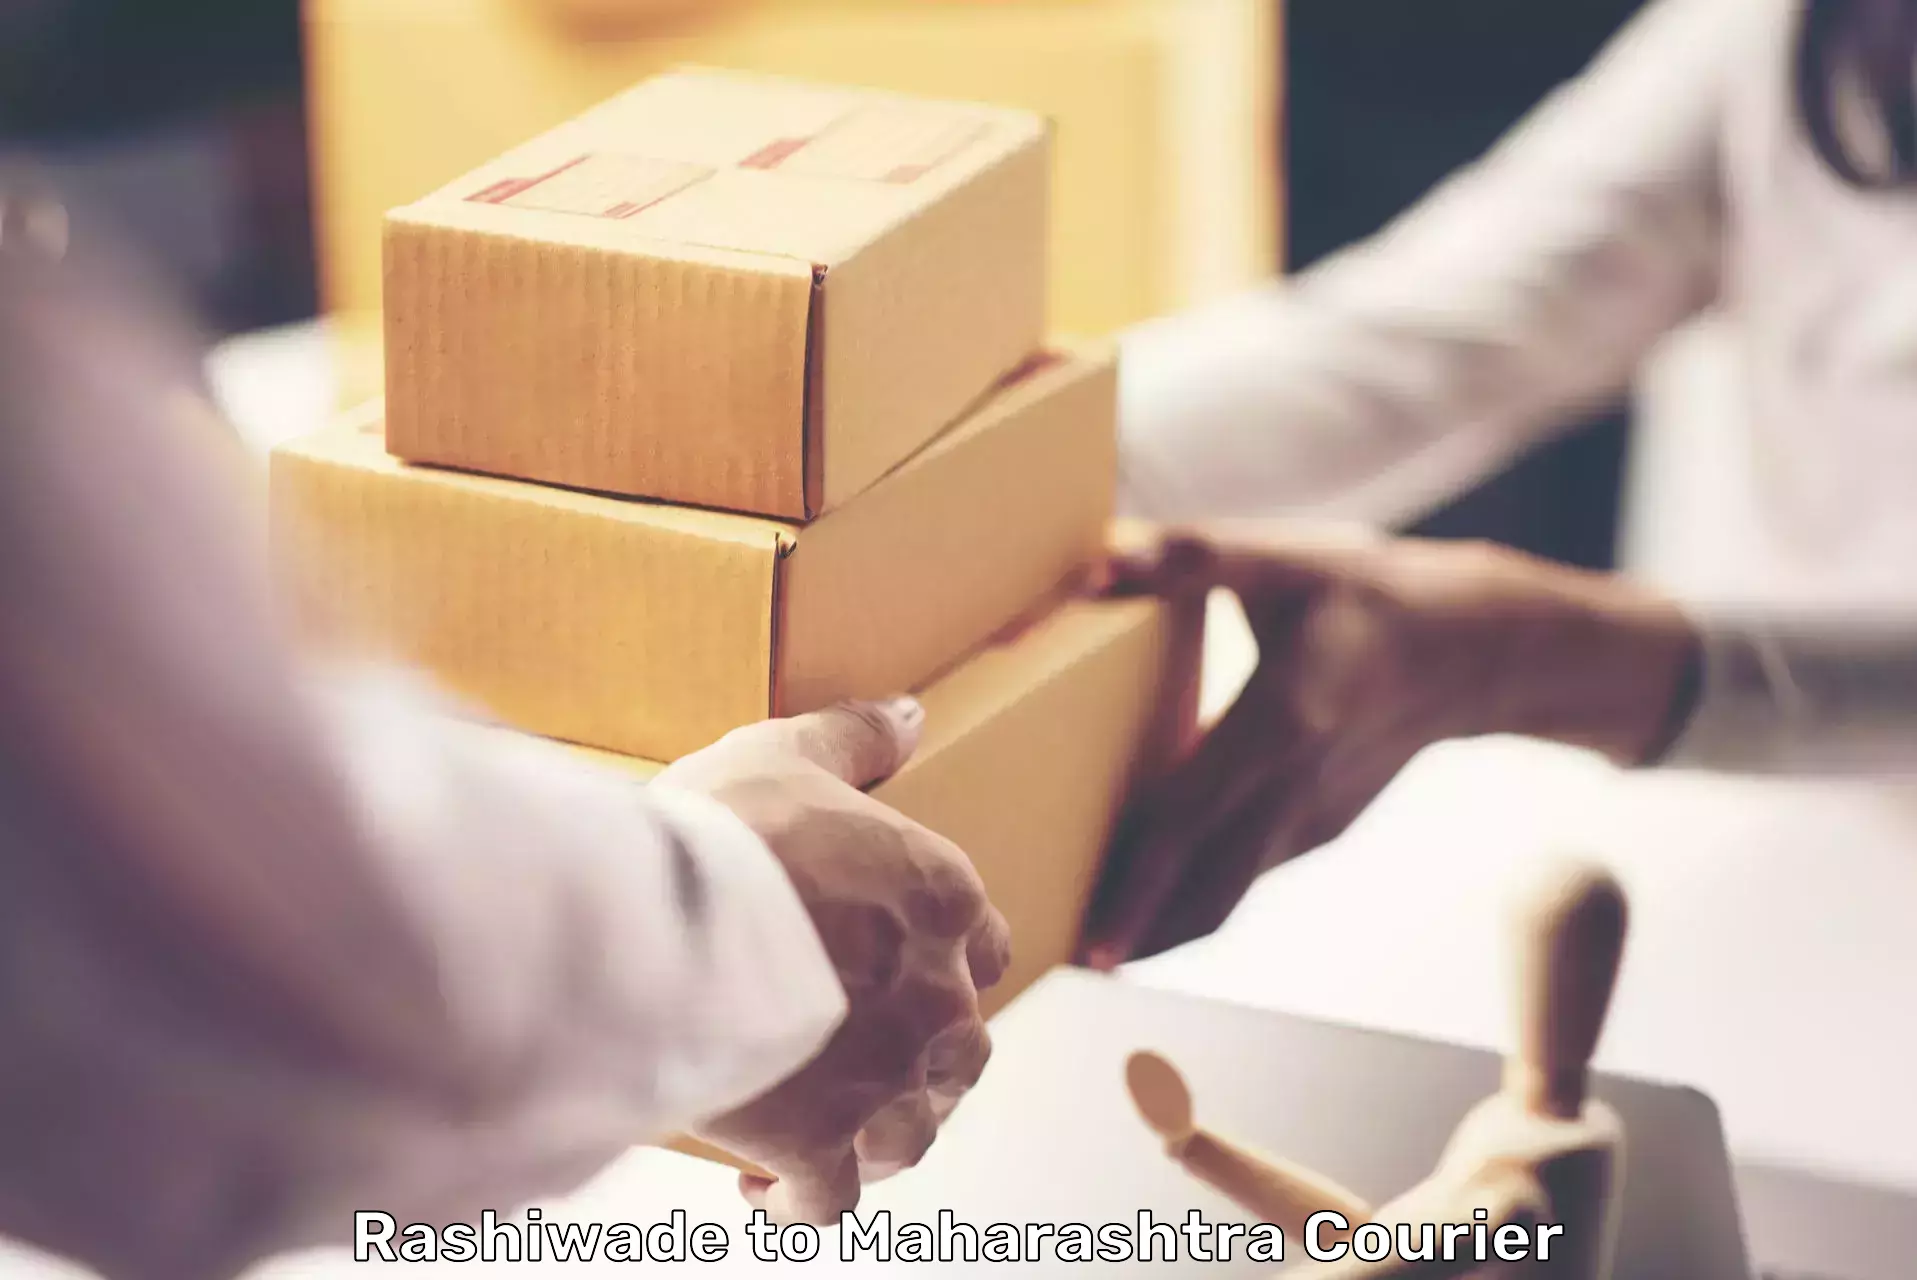 Affordable parcel service Rashiwade to Bhoom